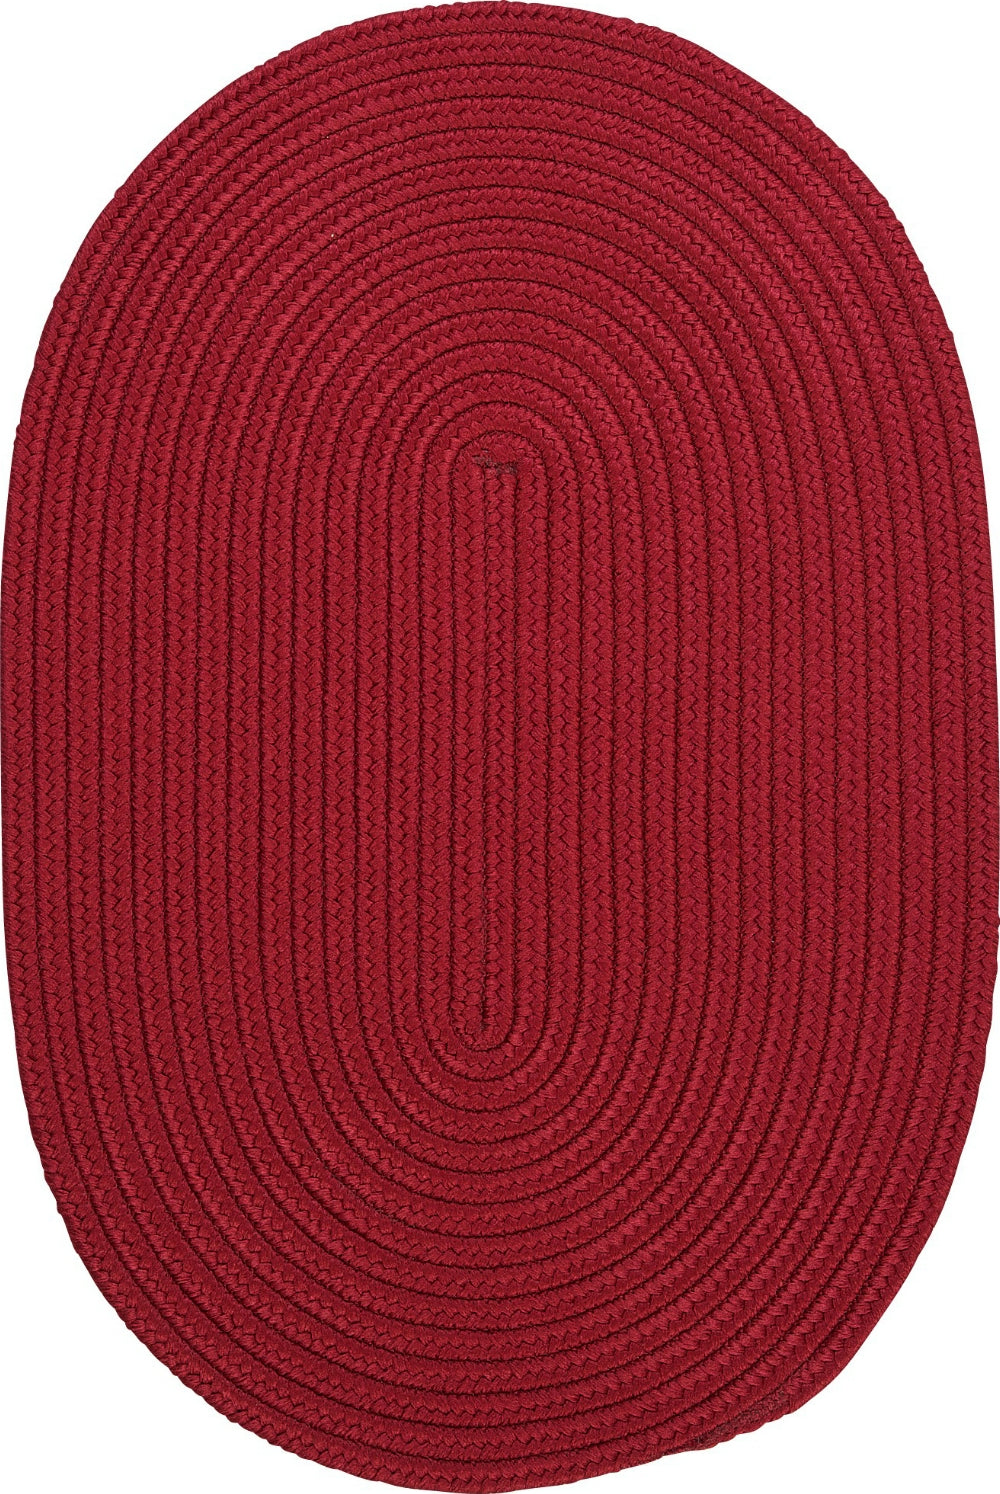 Colonial Mills Tortuga TG72 Red Area Rug